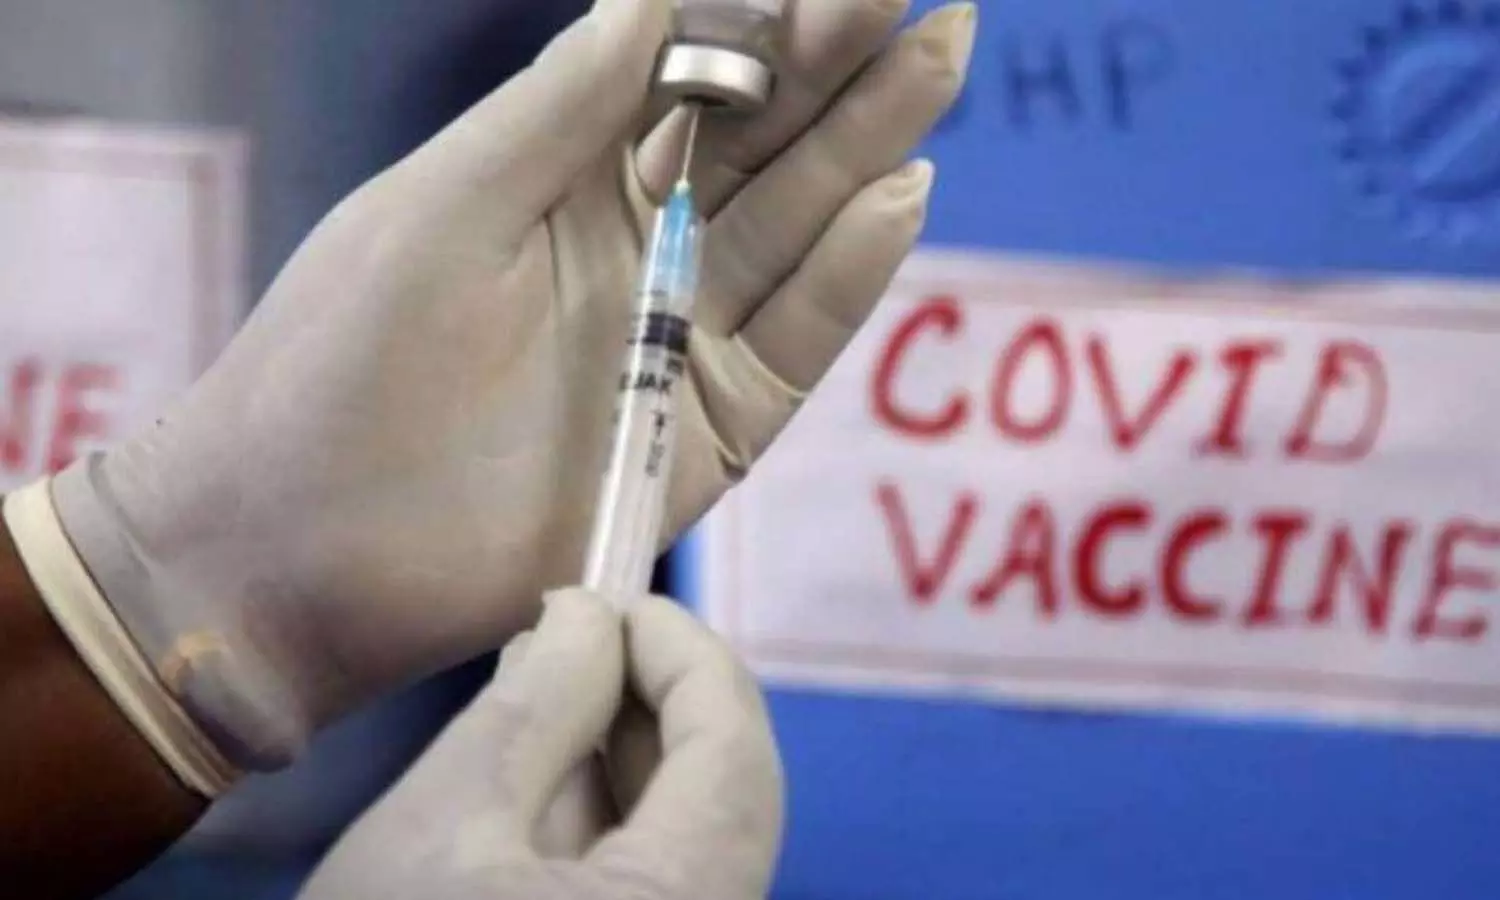 Corona Vaccine First death due to vaccine in India 68-year-old died